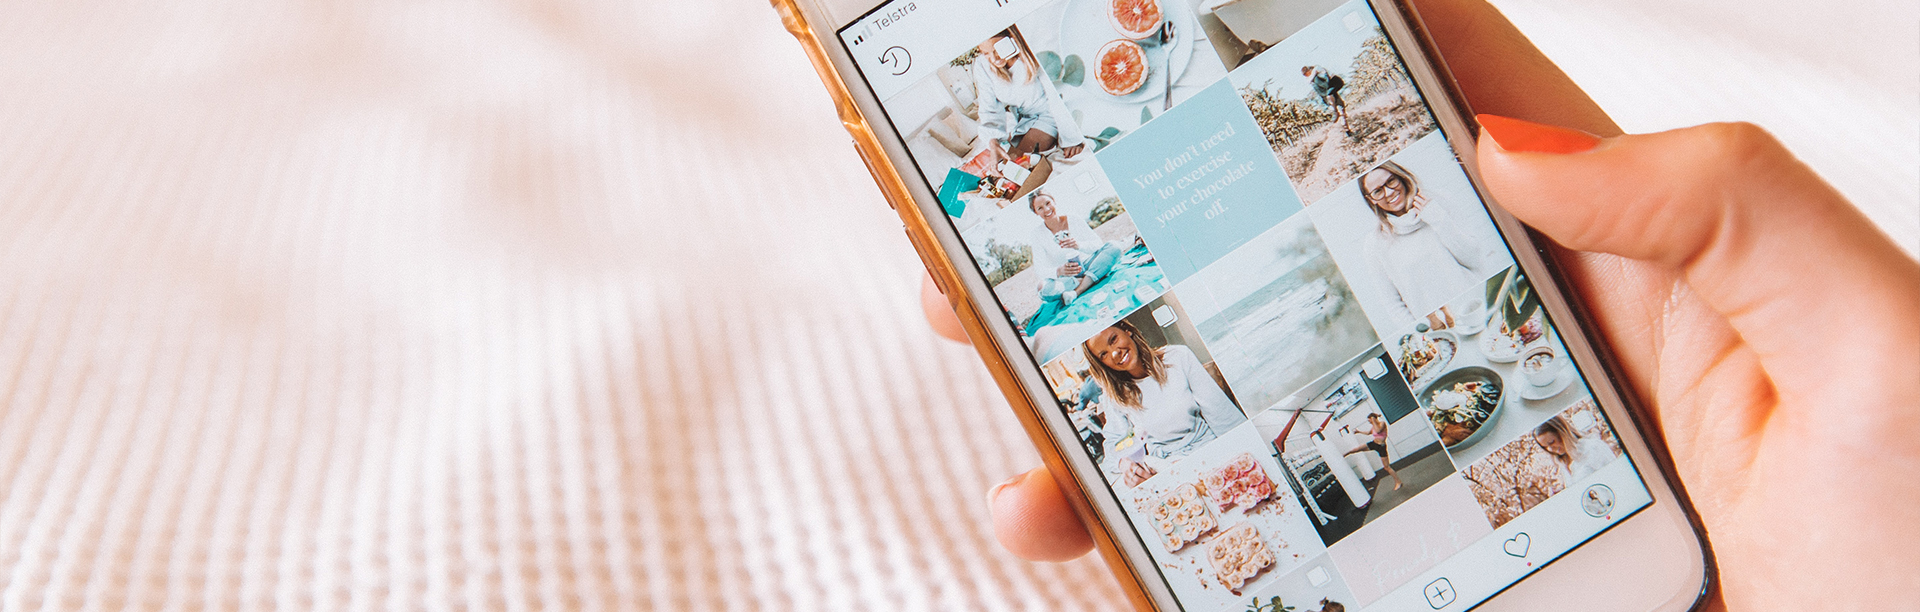 5 CTAs to Improve Your Instagram Post Engagement